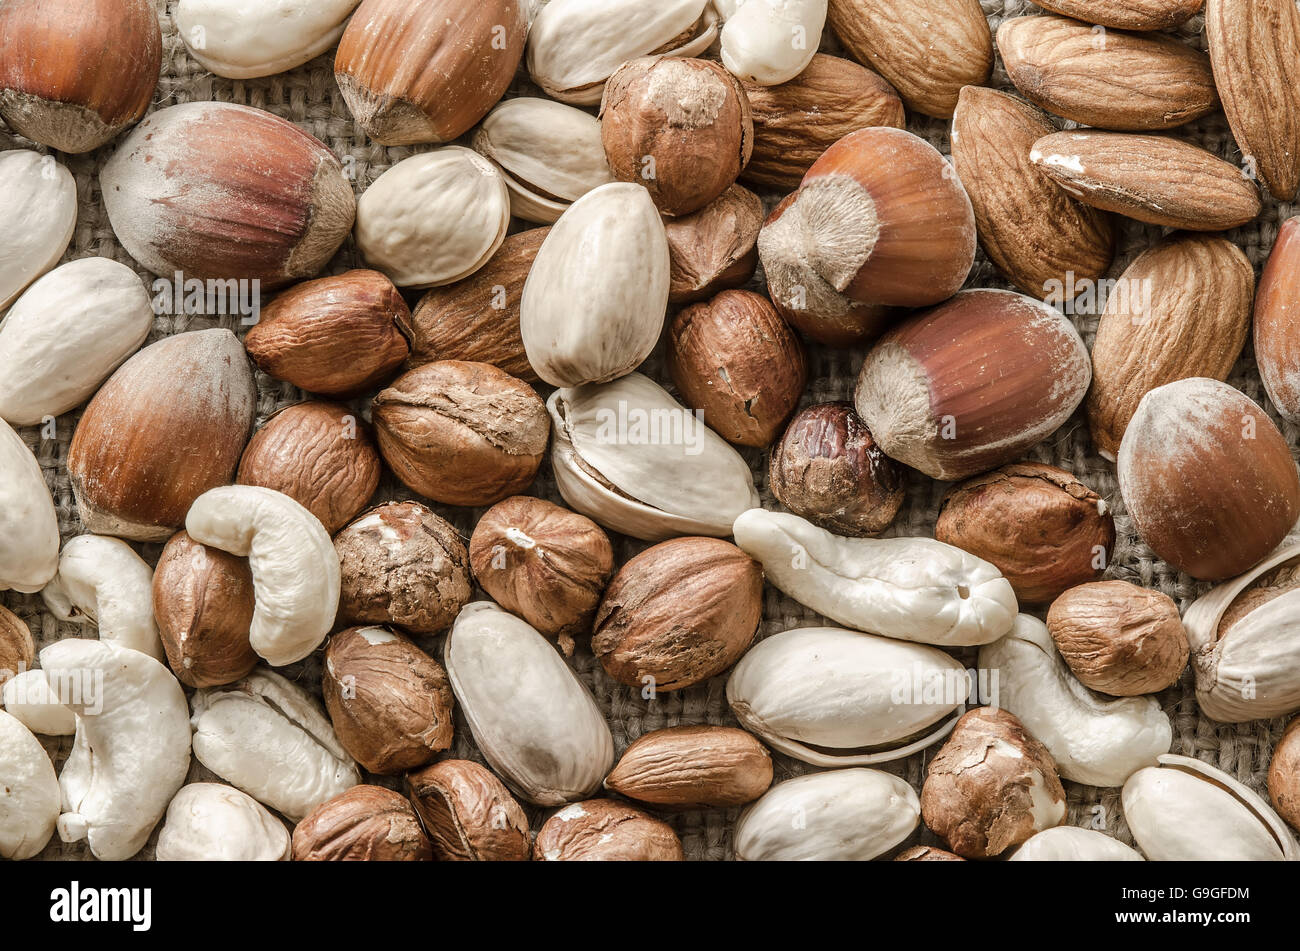 Group of different nuts isolated on bagging Stock Photo